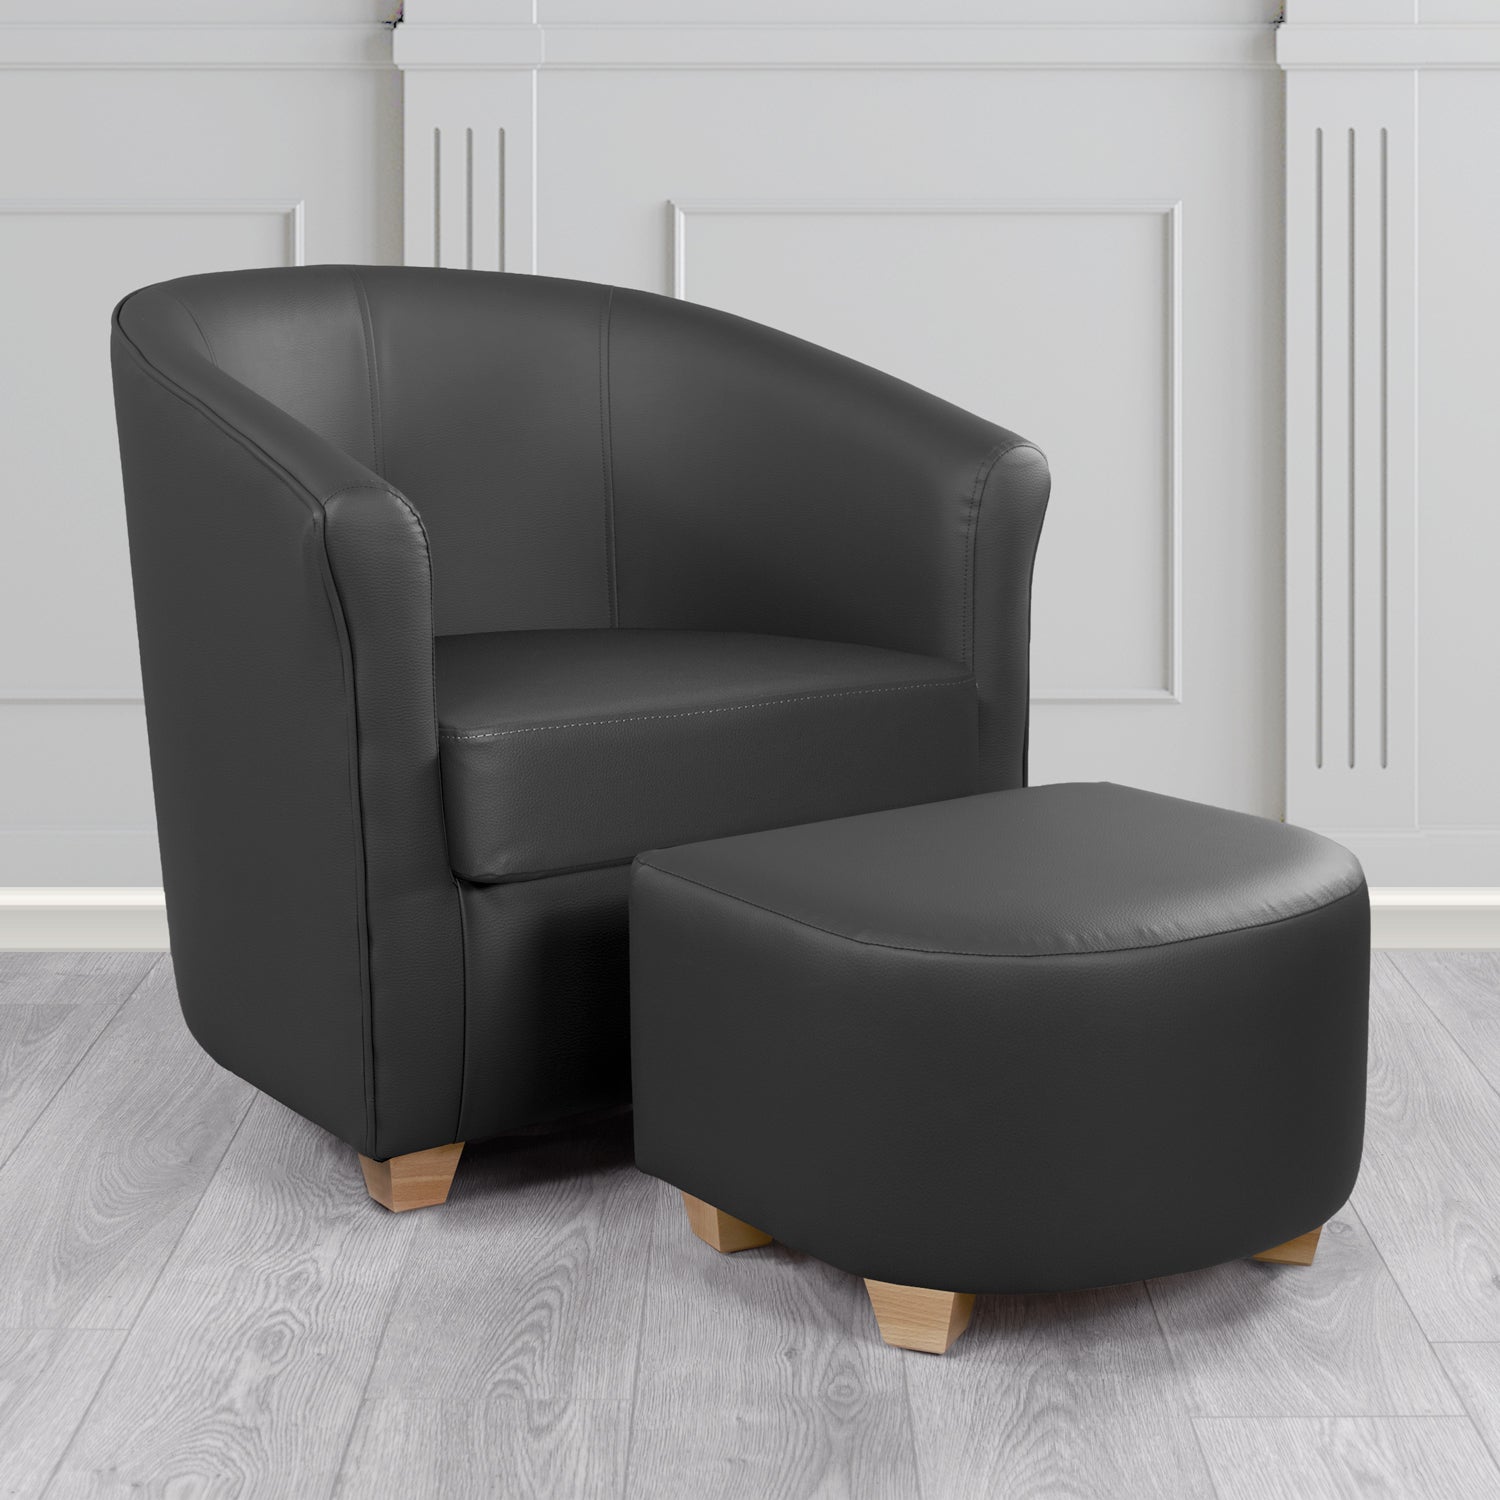 Cannes Tub Chair with Footstool Set in Just Colour Cobalt Crib 5 Faux Leather - The Tub Chair Shop